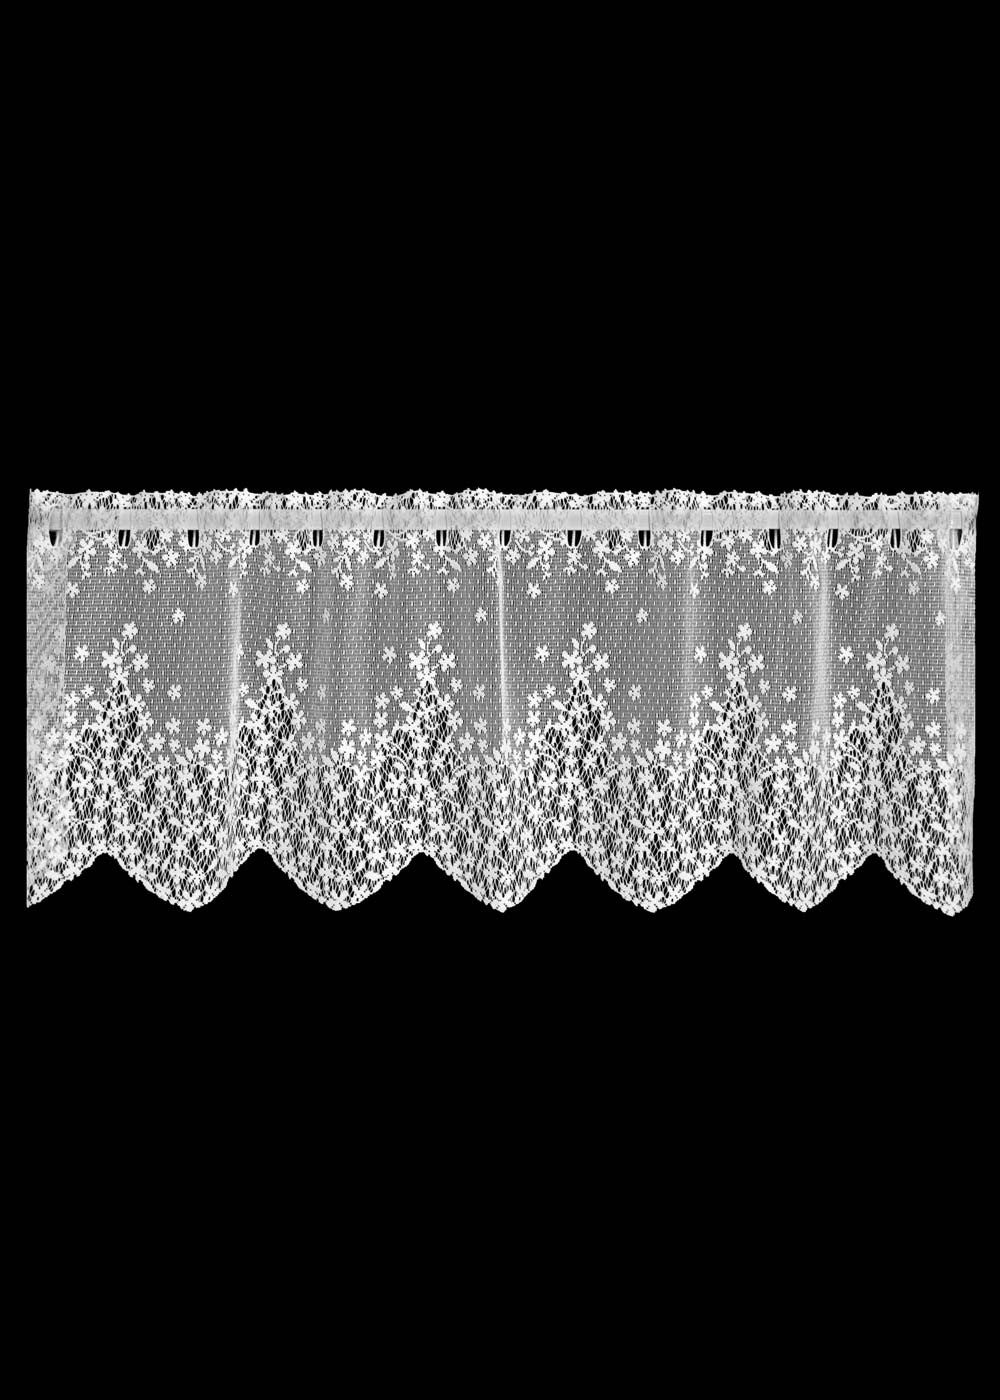 Blossom Lace Valance - Pine Hill Collections 